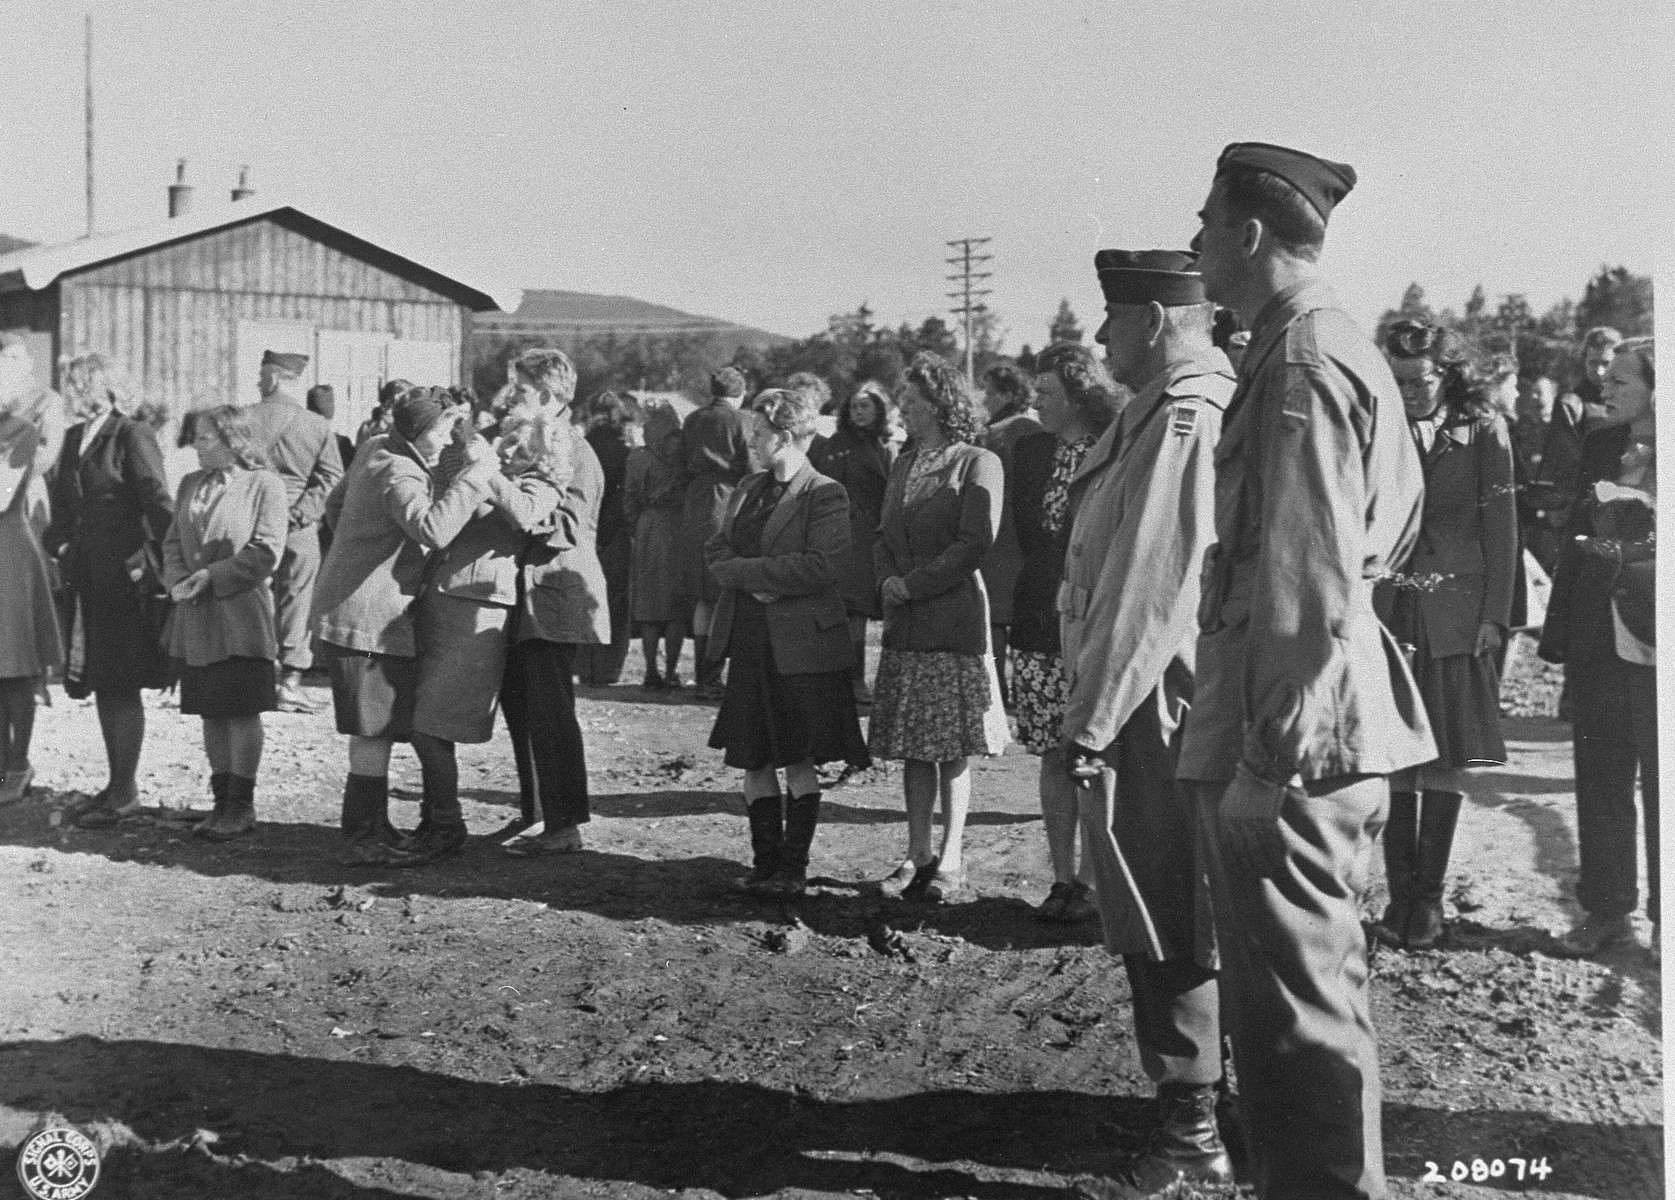 Brigadier General Owen Summers and Colonel Walker look on as Norwegian women suspected of collaborating with the Germans are screened by Allied authorities.